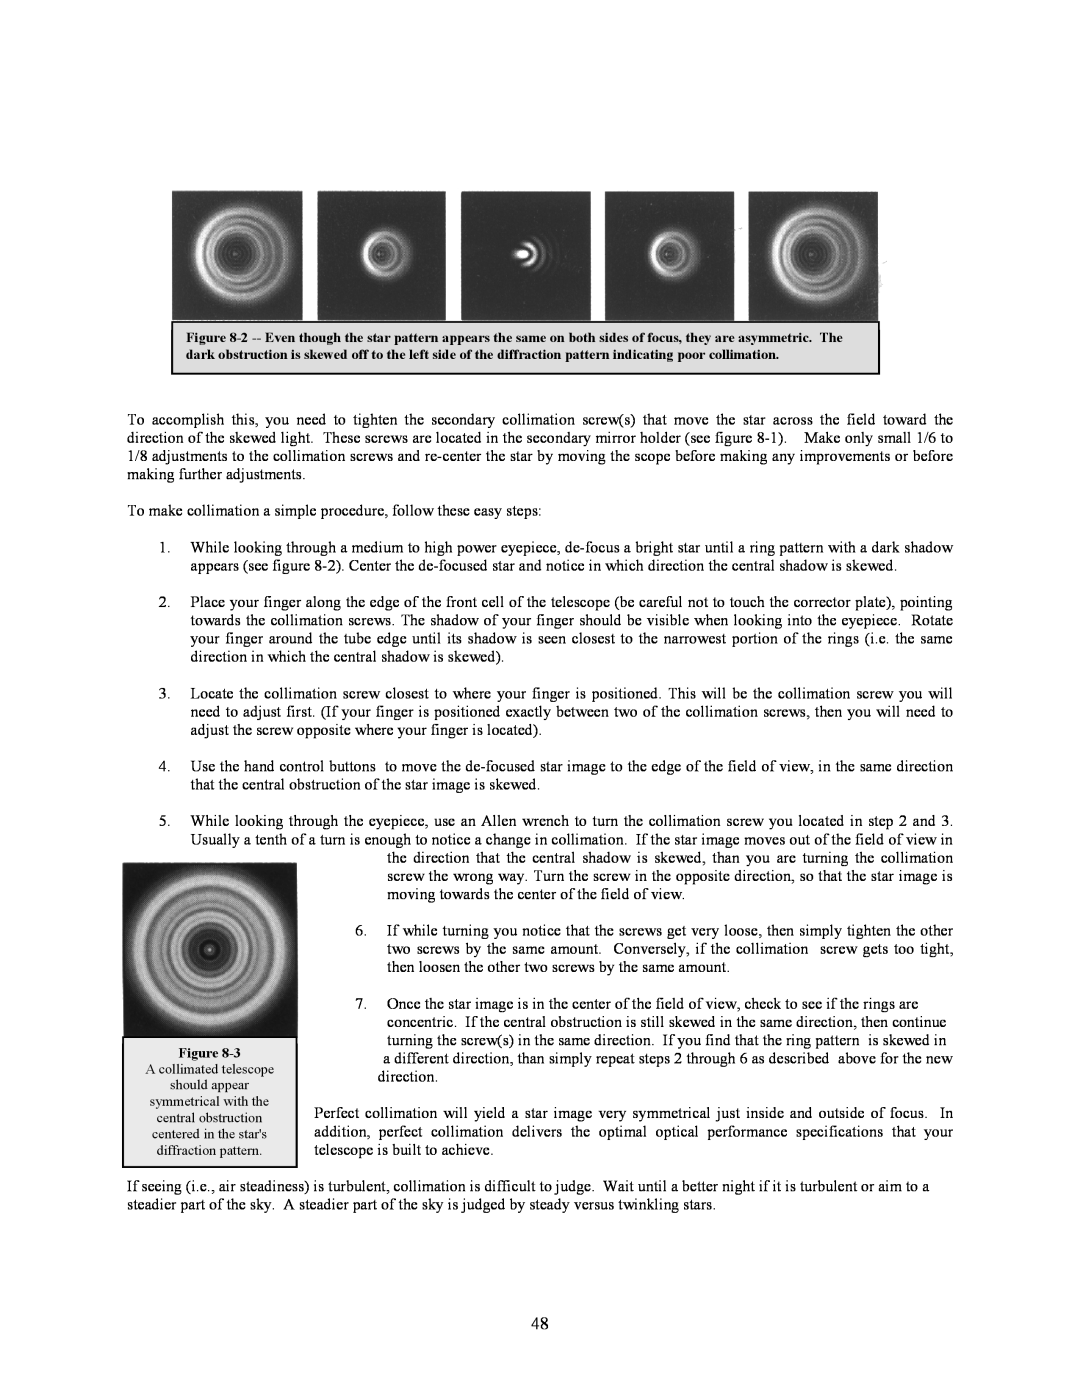 Celestron C8-S, C9-S, C5-S instruction manual To make collimation a simple procedure, follow these easy steps 